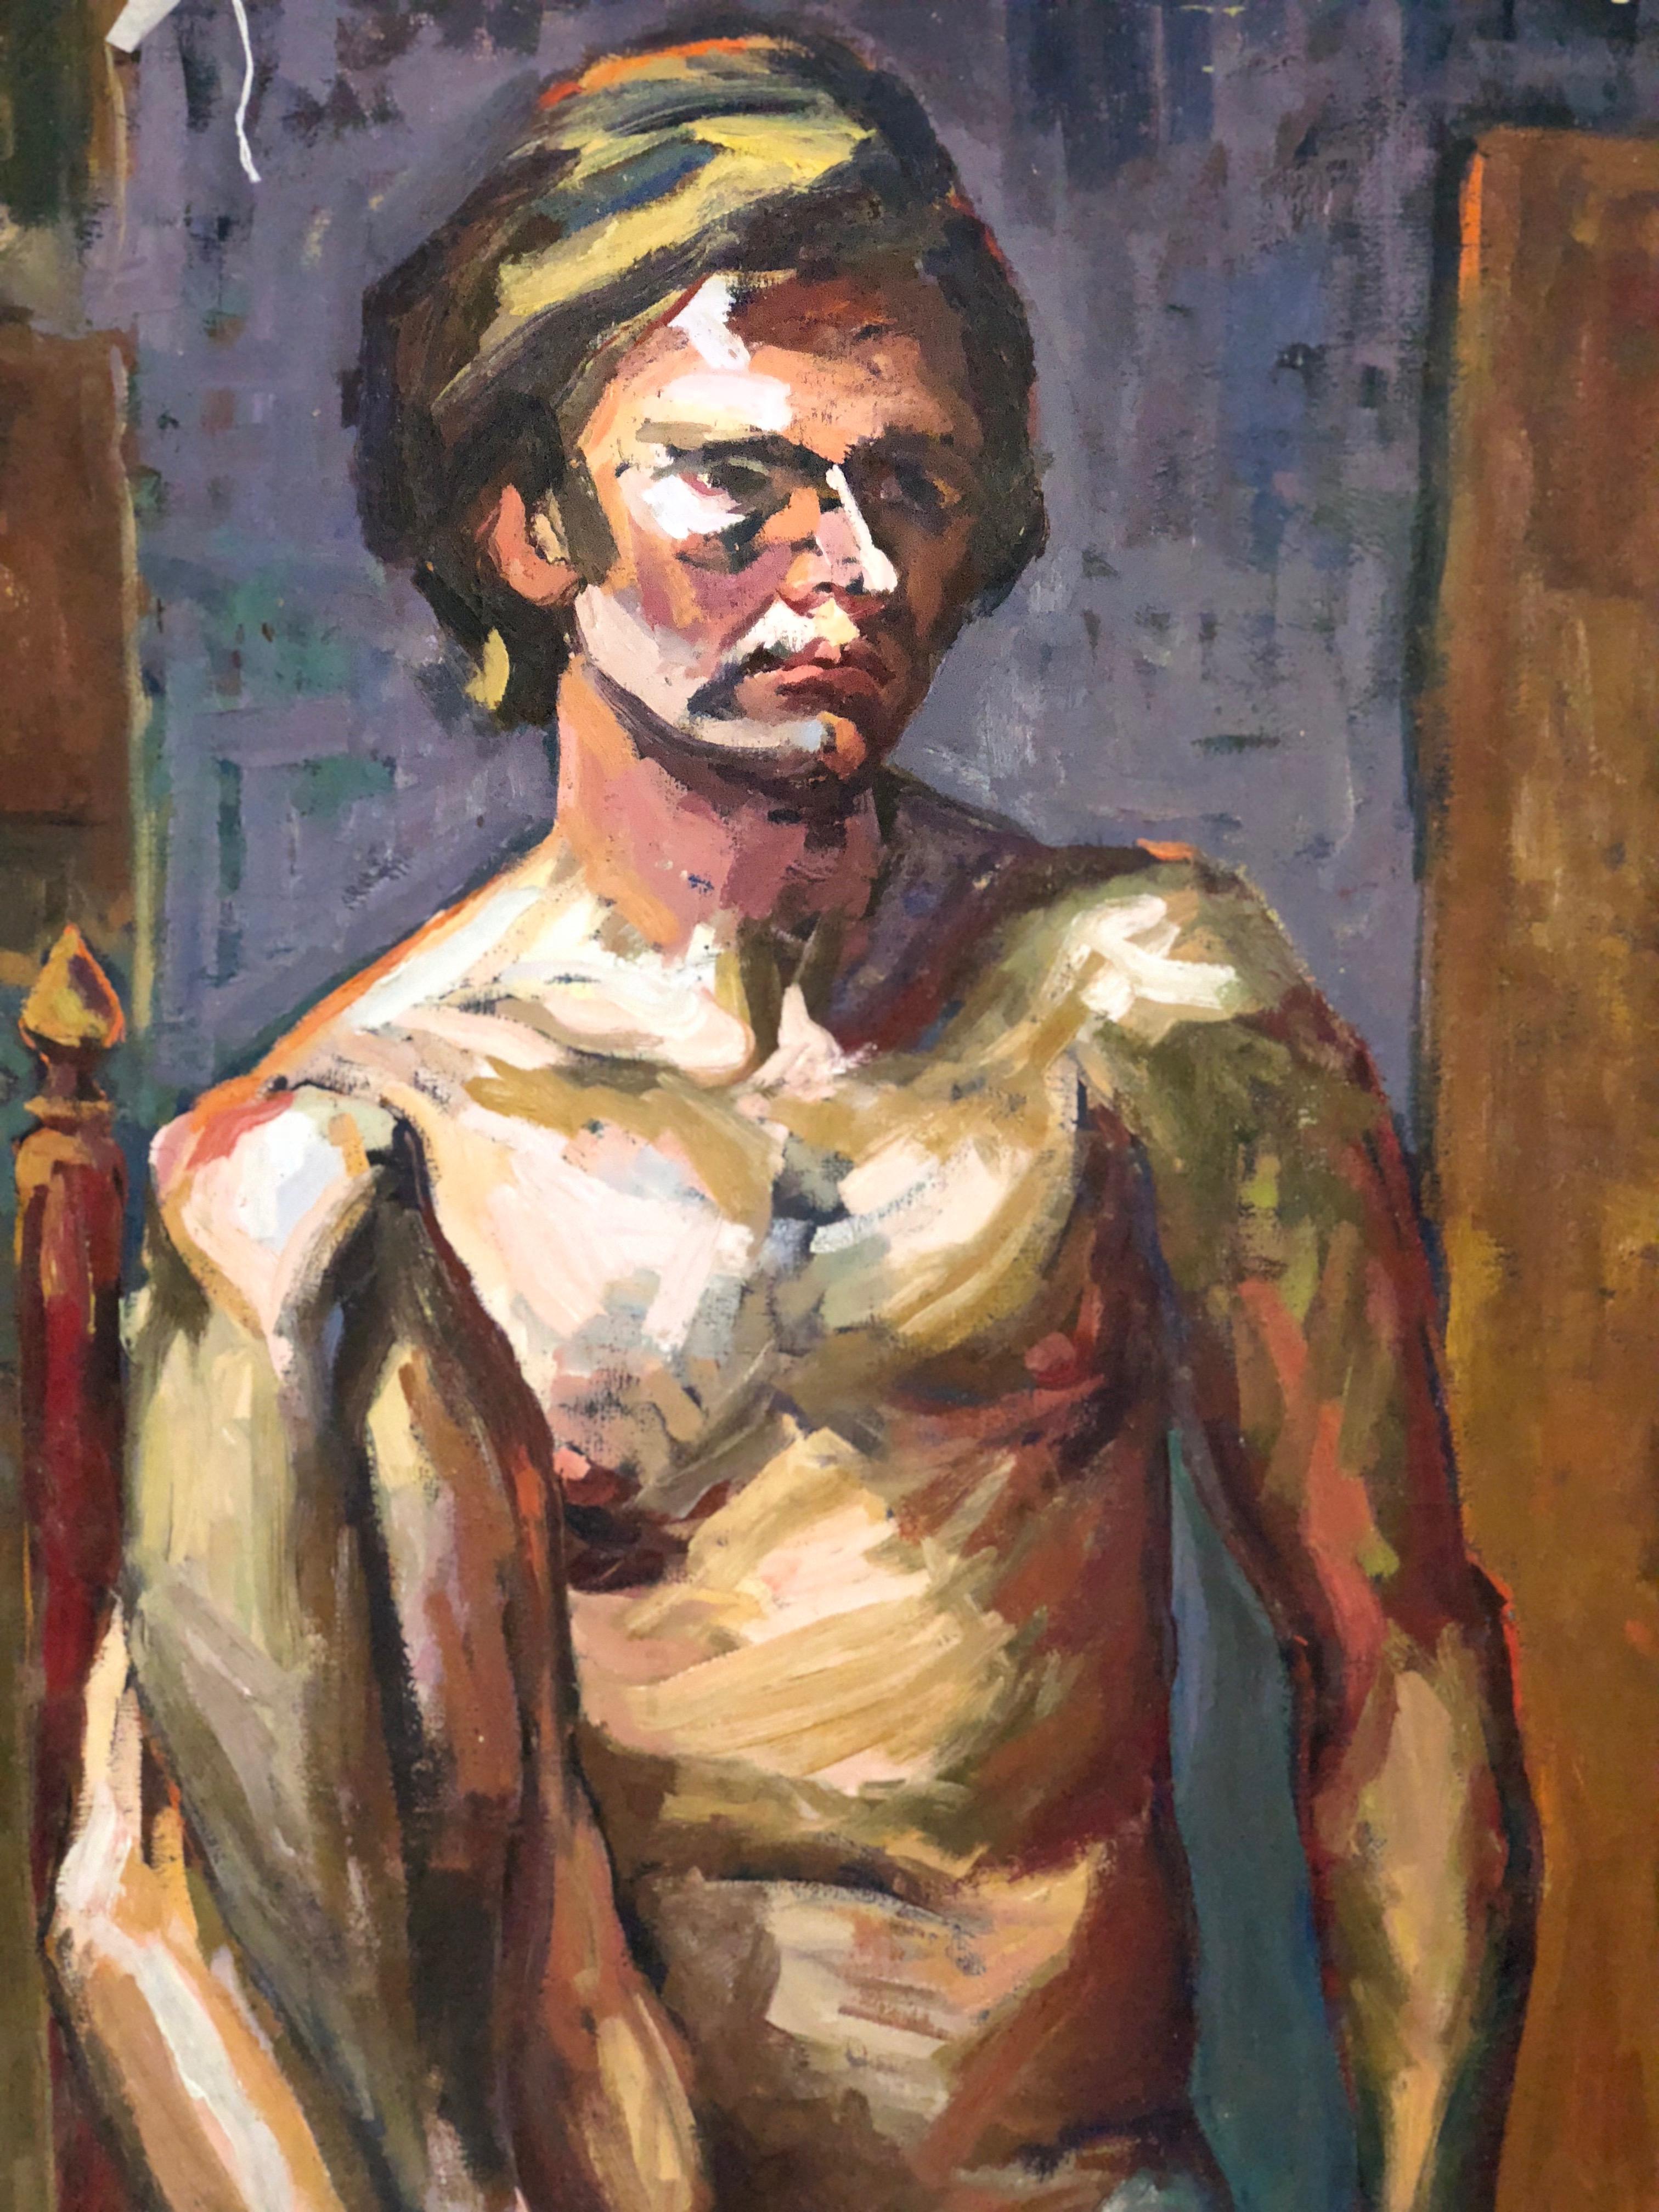 Oil nude portrait by Lois Foley Whitcomb. Dimensions: 40